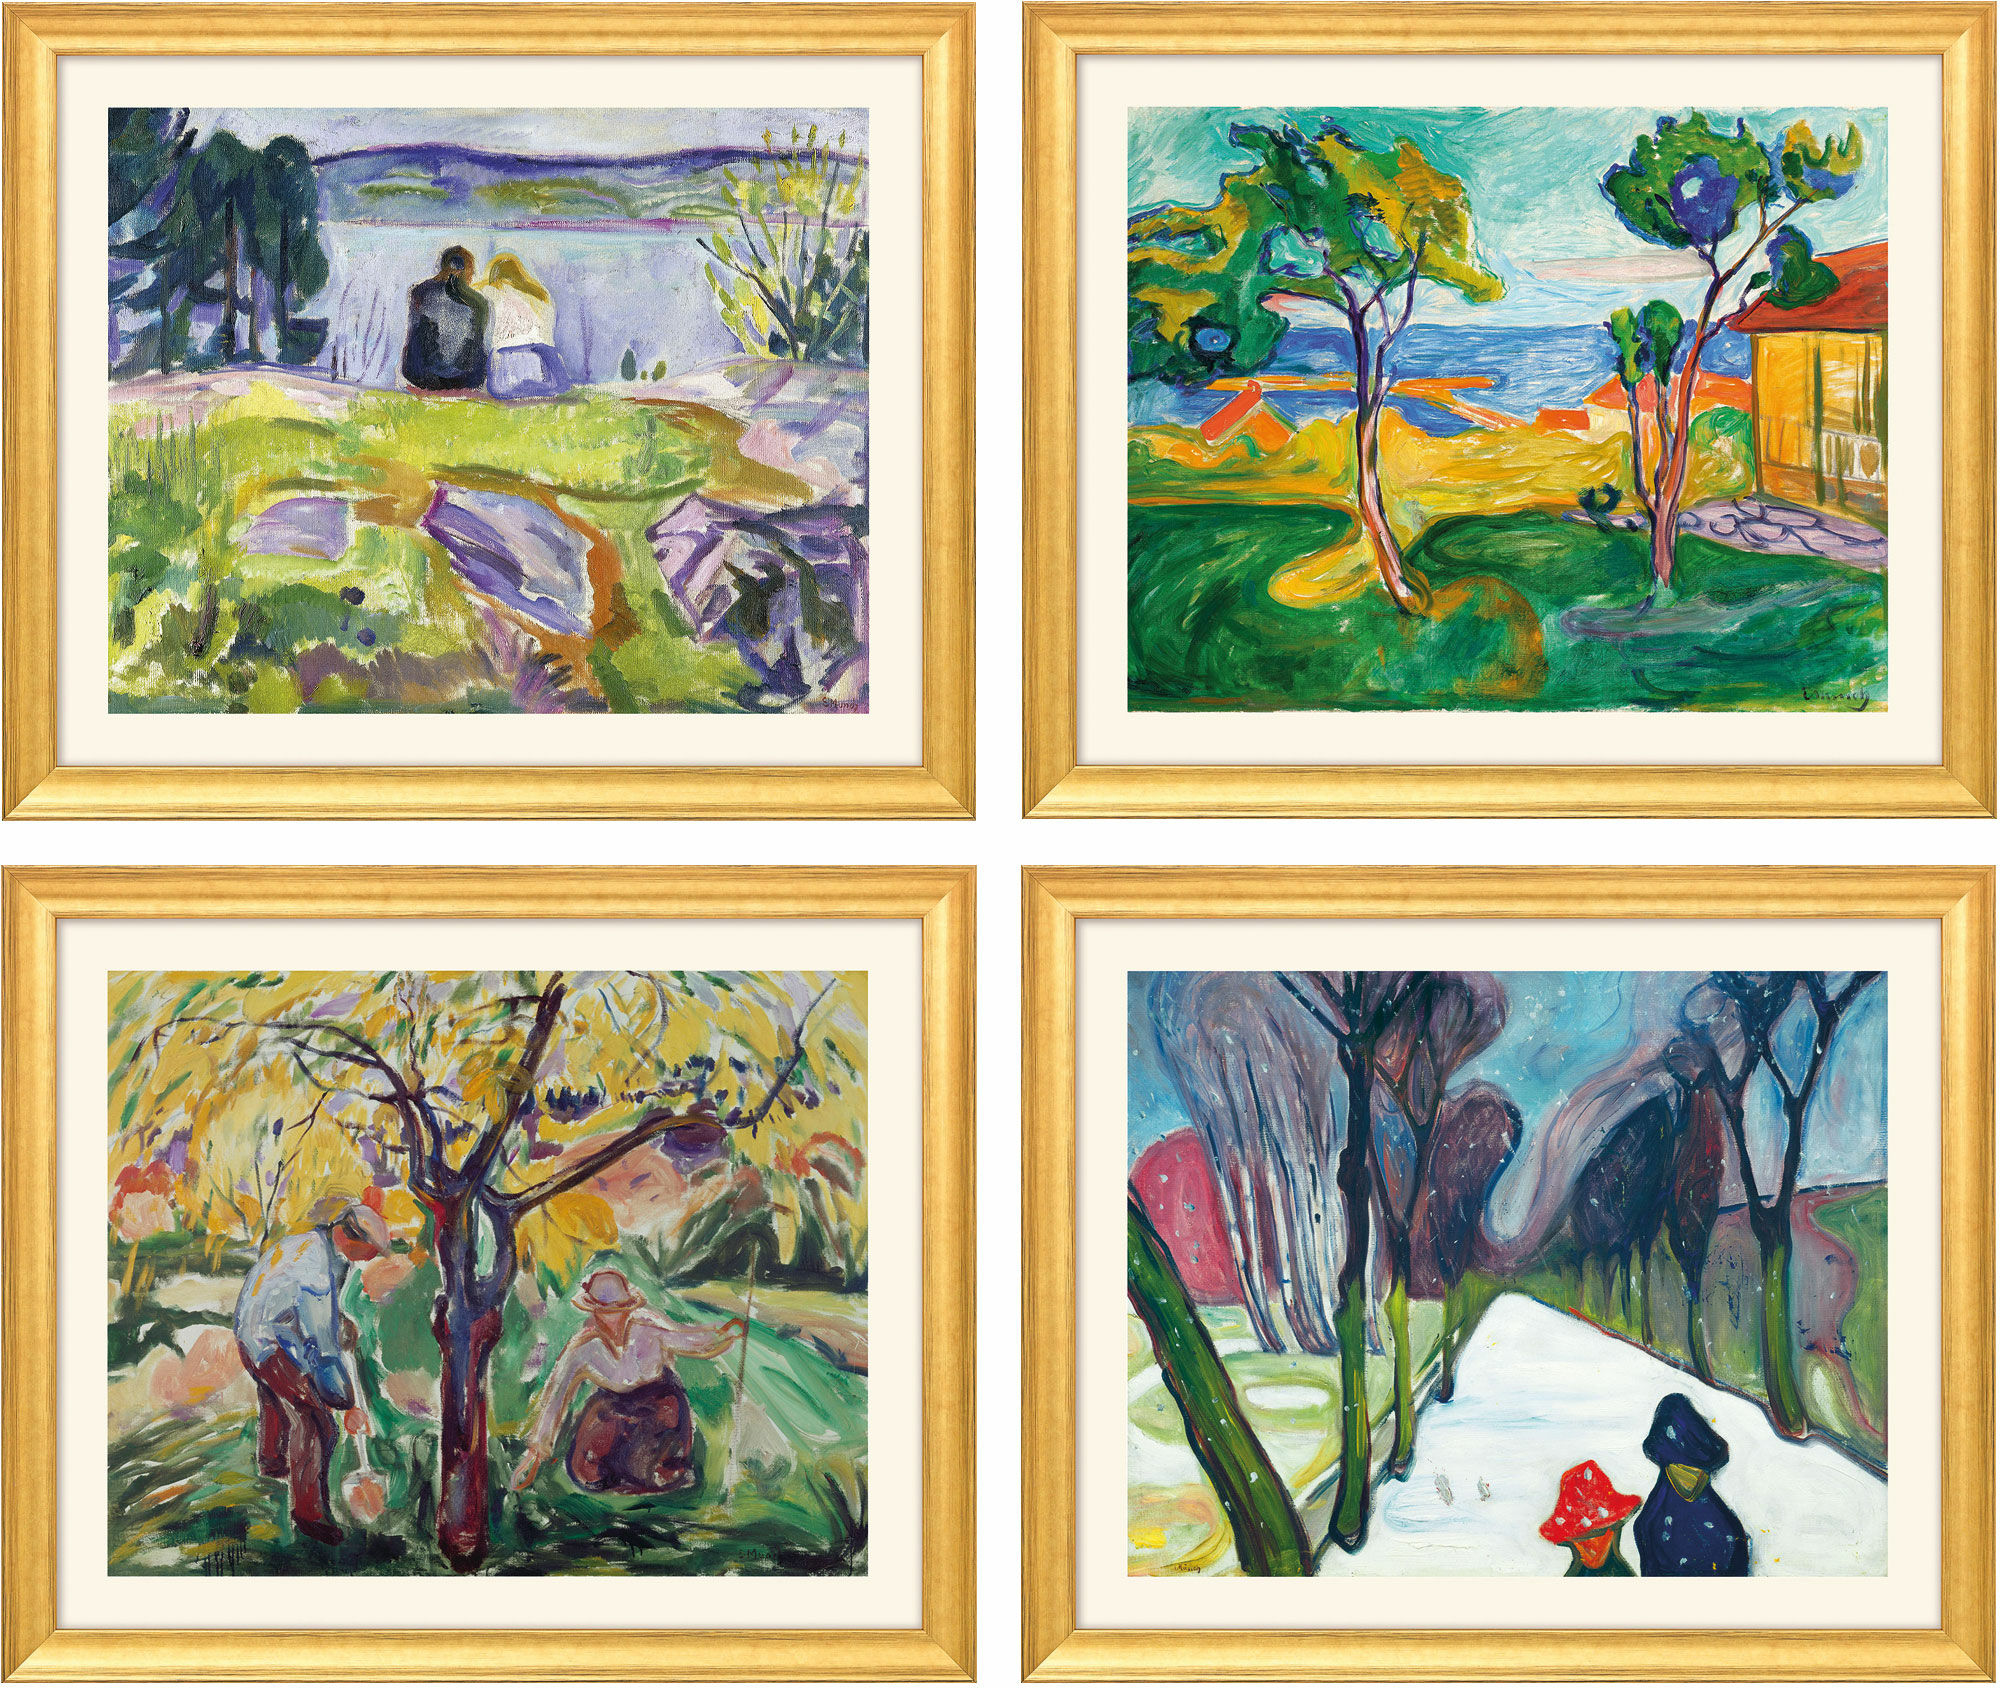 Set of 4 pictures "Seasons Cycle", golden framed version by Edvard Munch